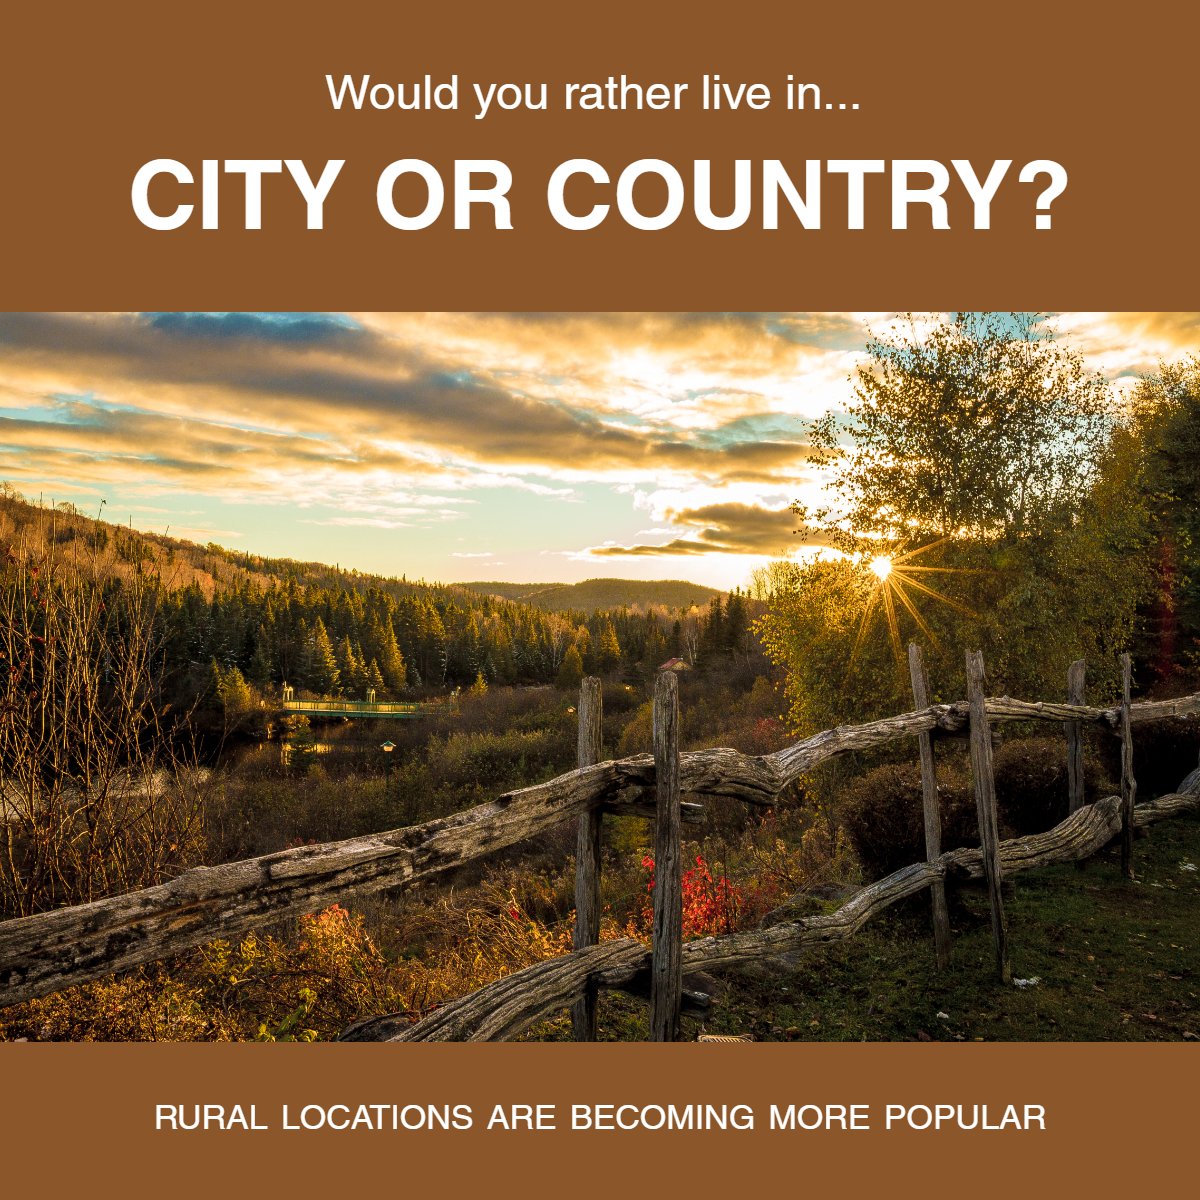 Would you rather live in the city or country? 🏙️🌄

#wouldyourather #cityorcountry #citylights #realestatequestion #realestate
 #bathroom #design #realestate #milwaukee #wisconsin